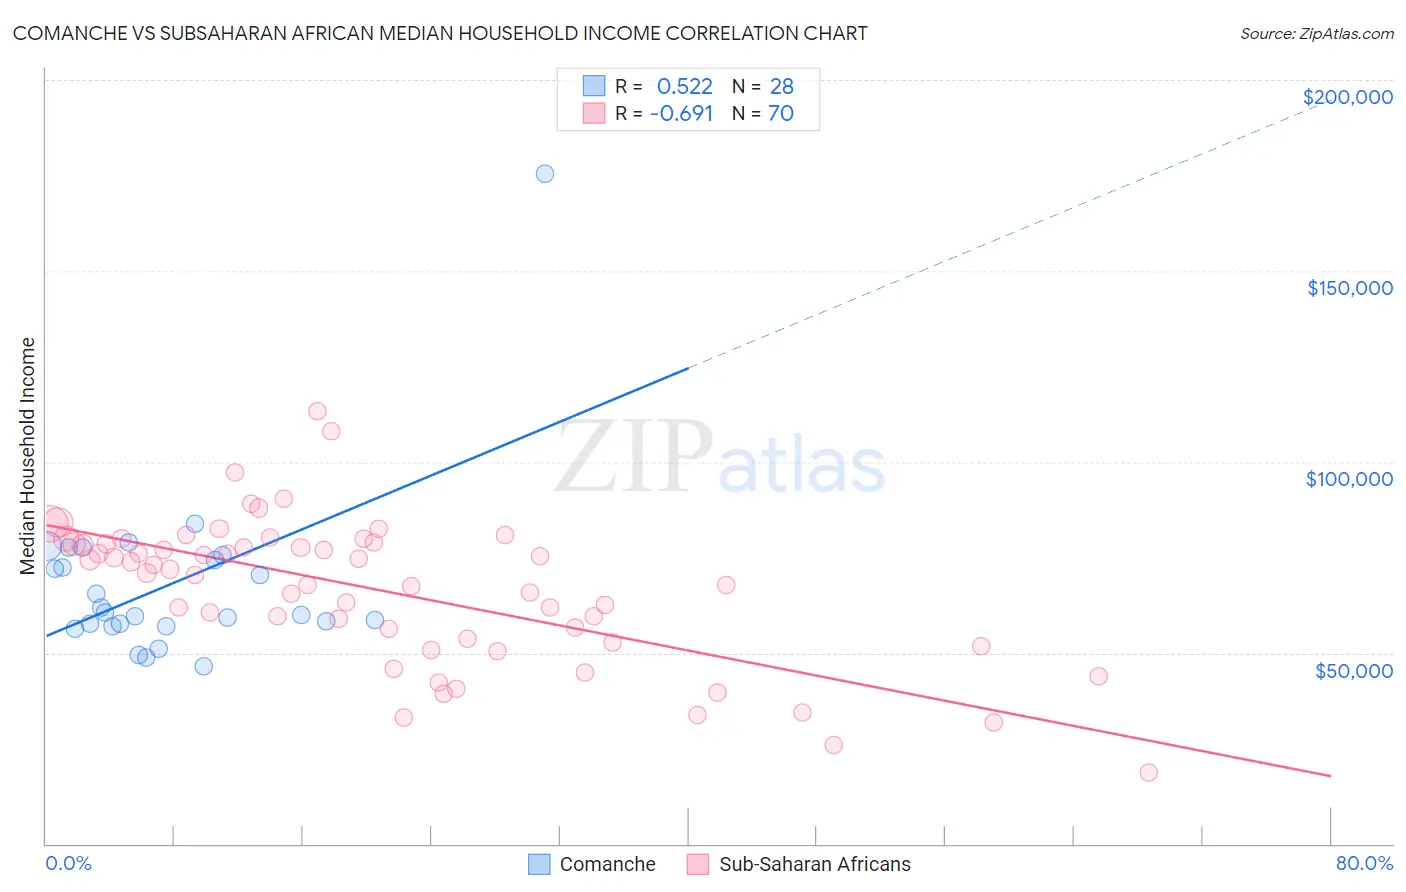 Comanche vs Subsaharan African Median Household Income